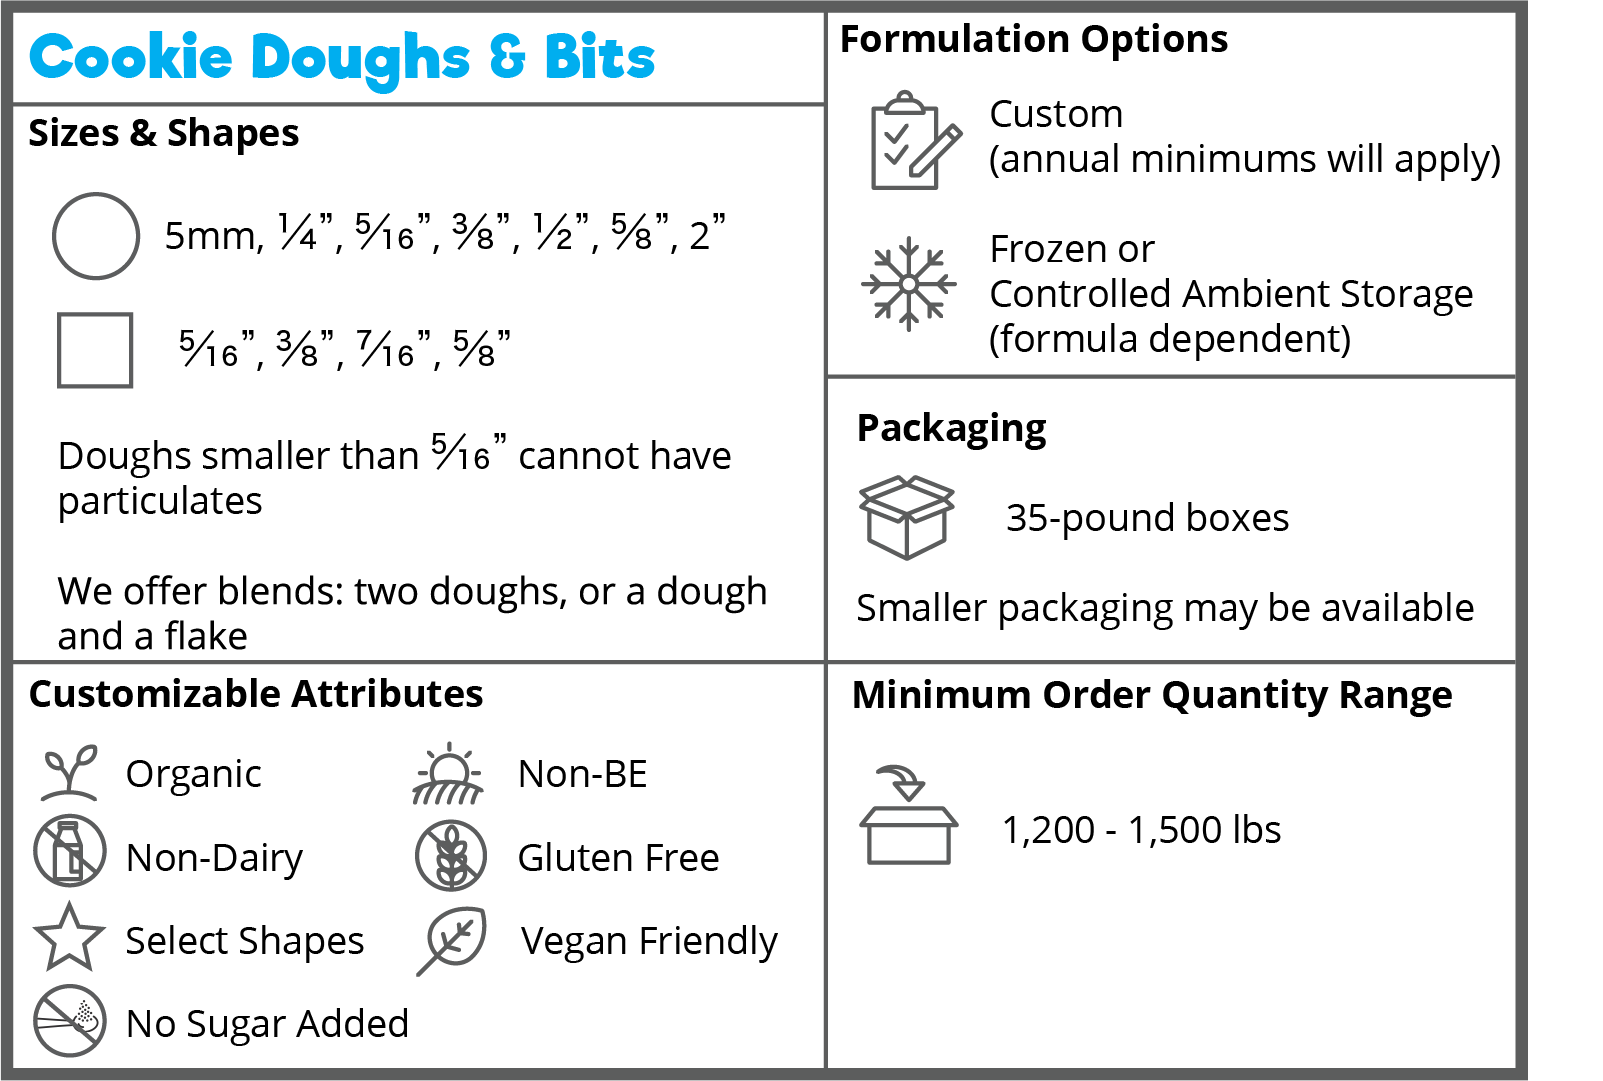 describes available sizes, shapes, and more of Denali Ingredients Cookie Doughs